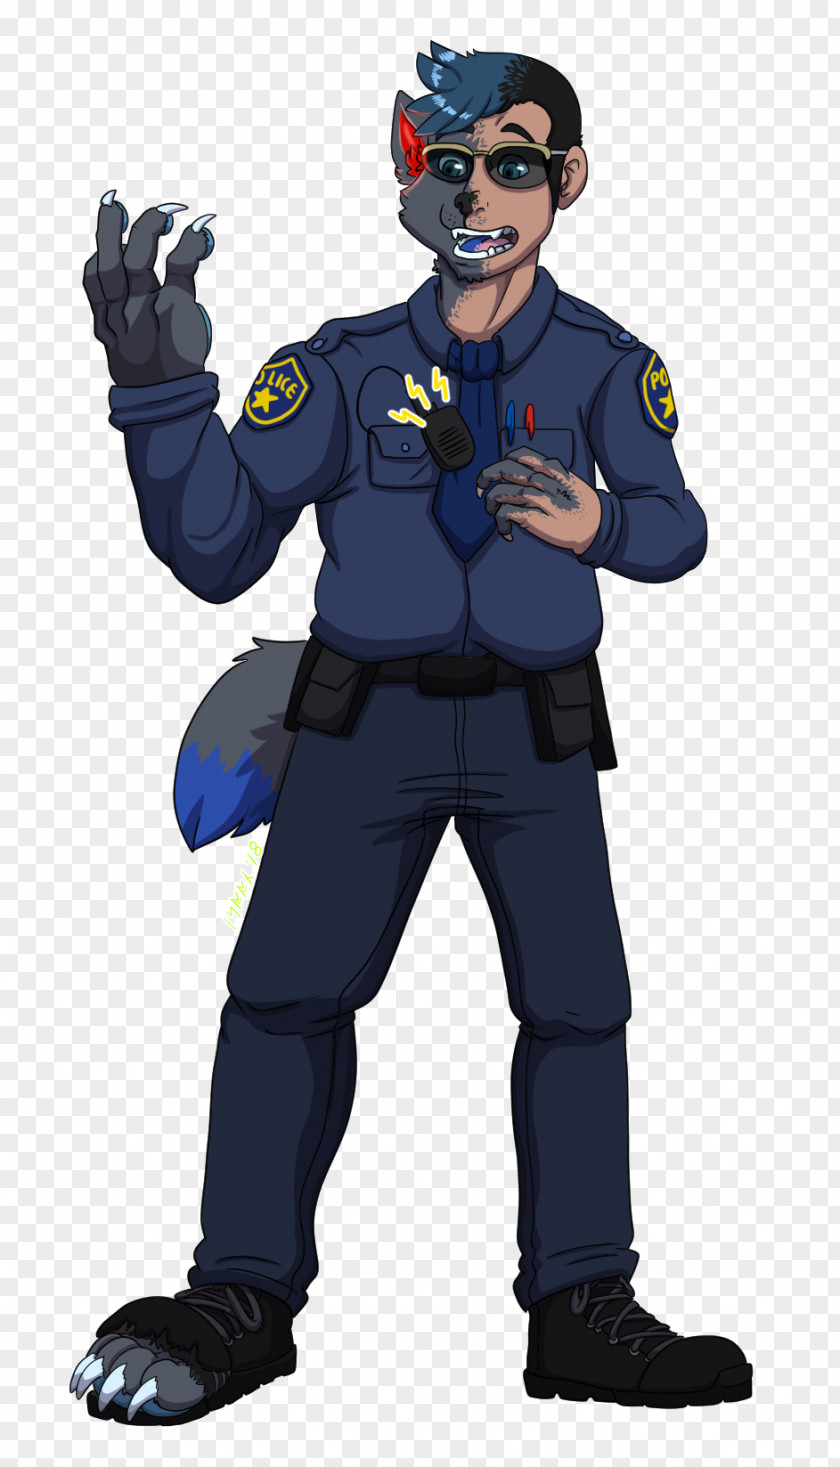 Police Officer Army Uniform Superhero PNG